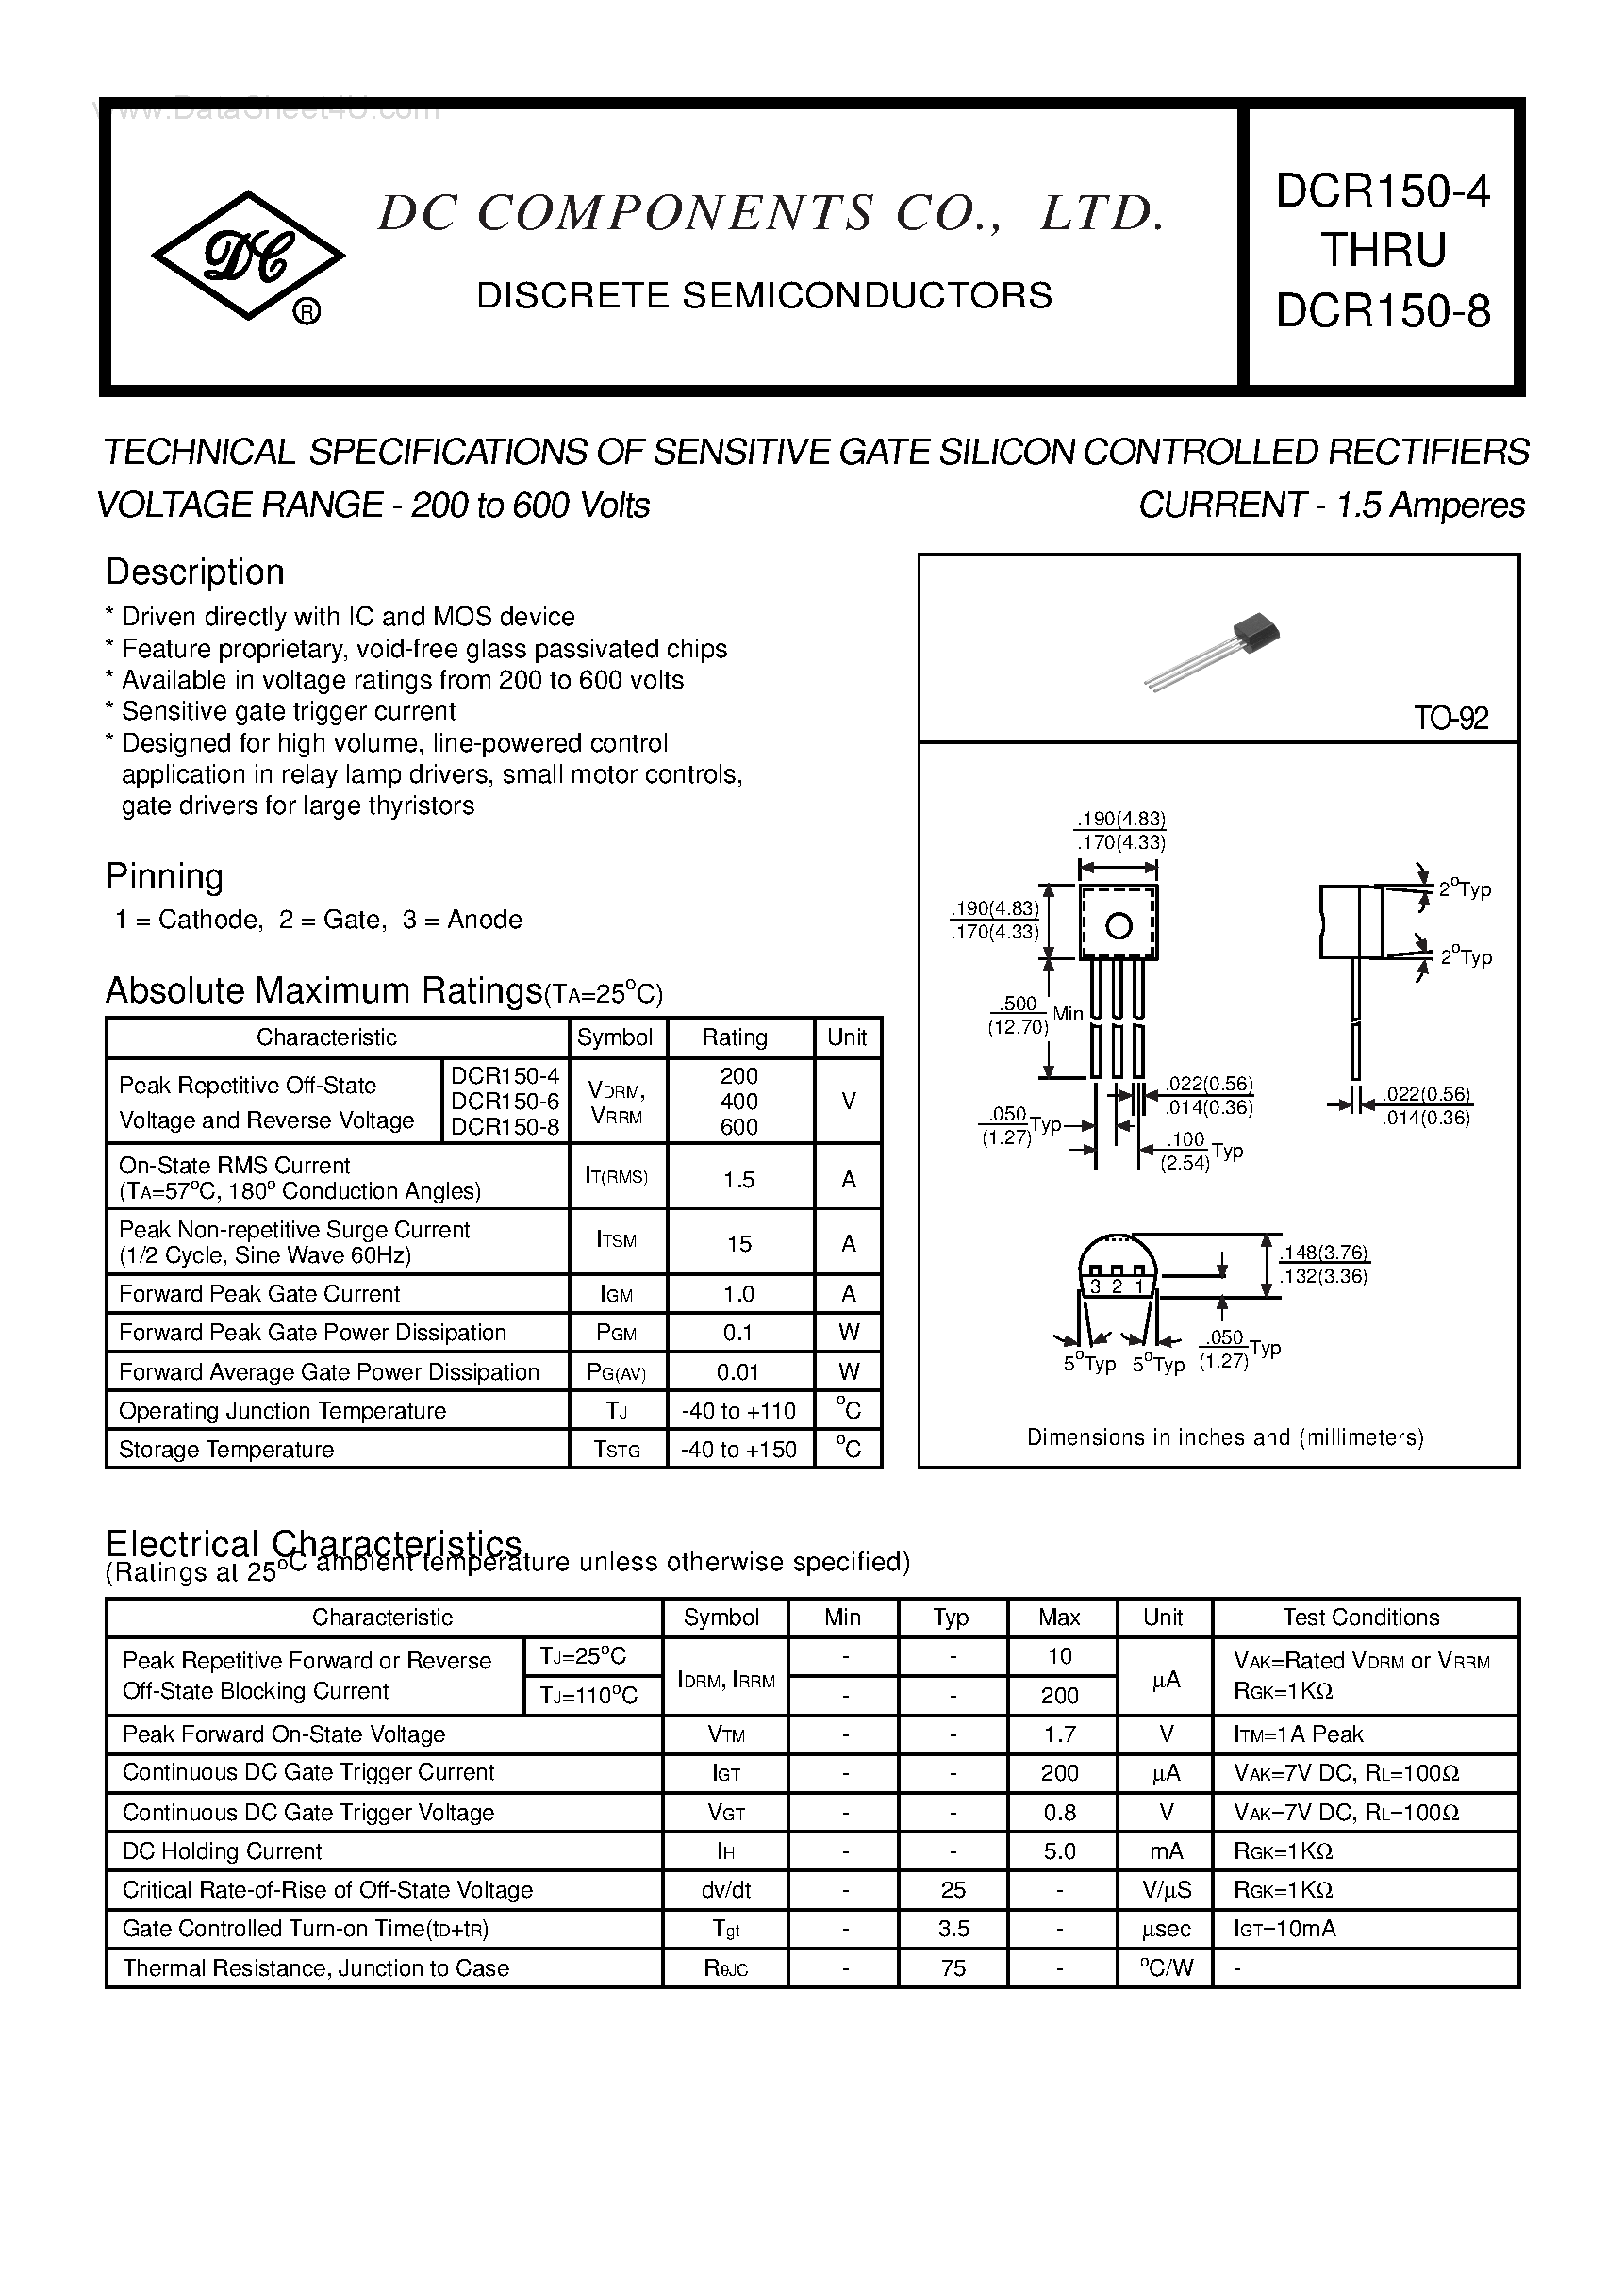 Даташит DCR150-4 - (DCR150-4 - DCR150-8) TECHNICAL SPECIFICATIONS OF SENSITIVE GATE SILICON CONTROLLED RECTIFIERS страница 1